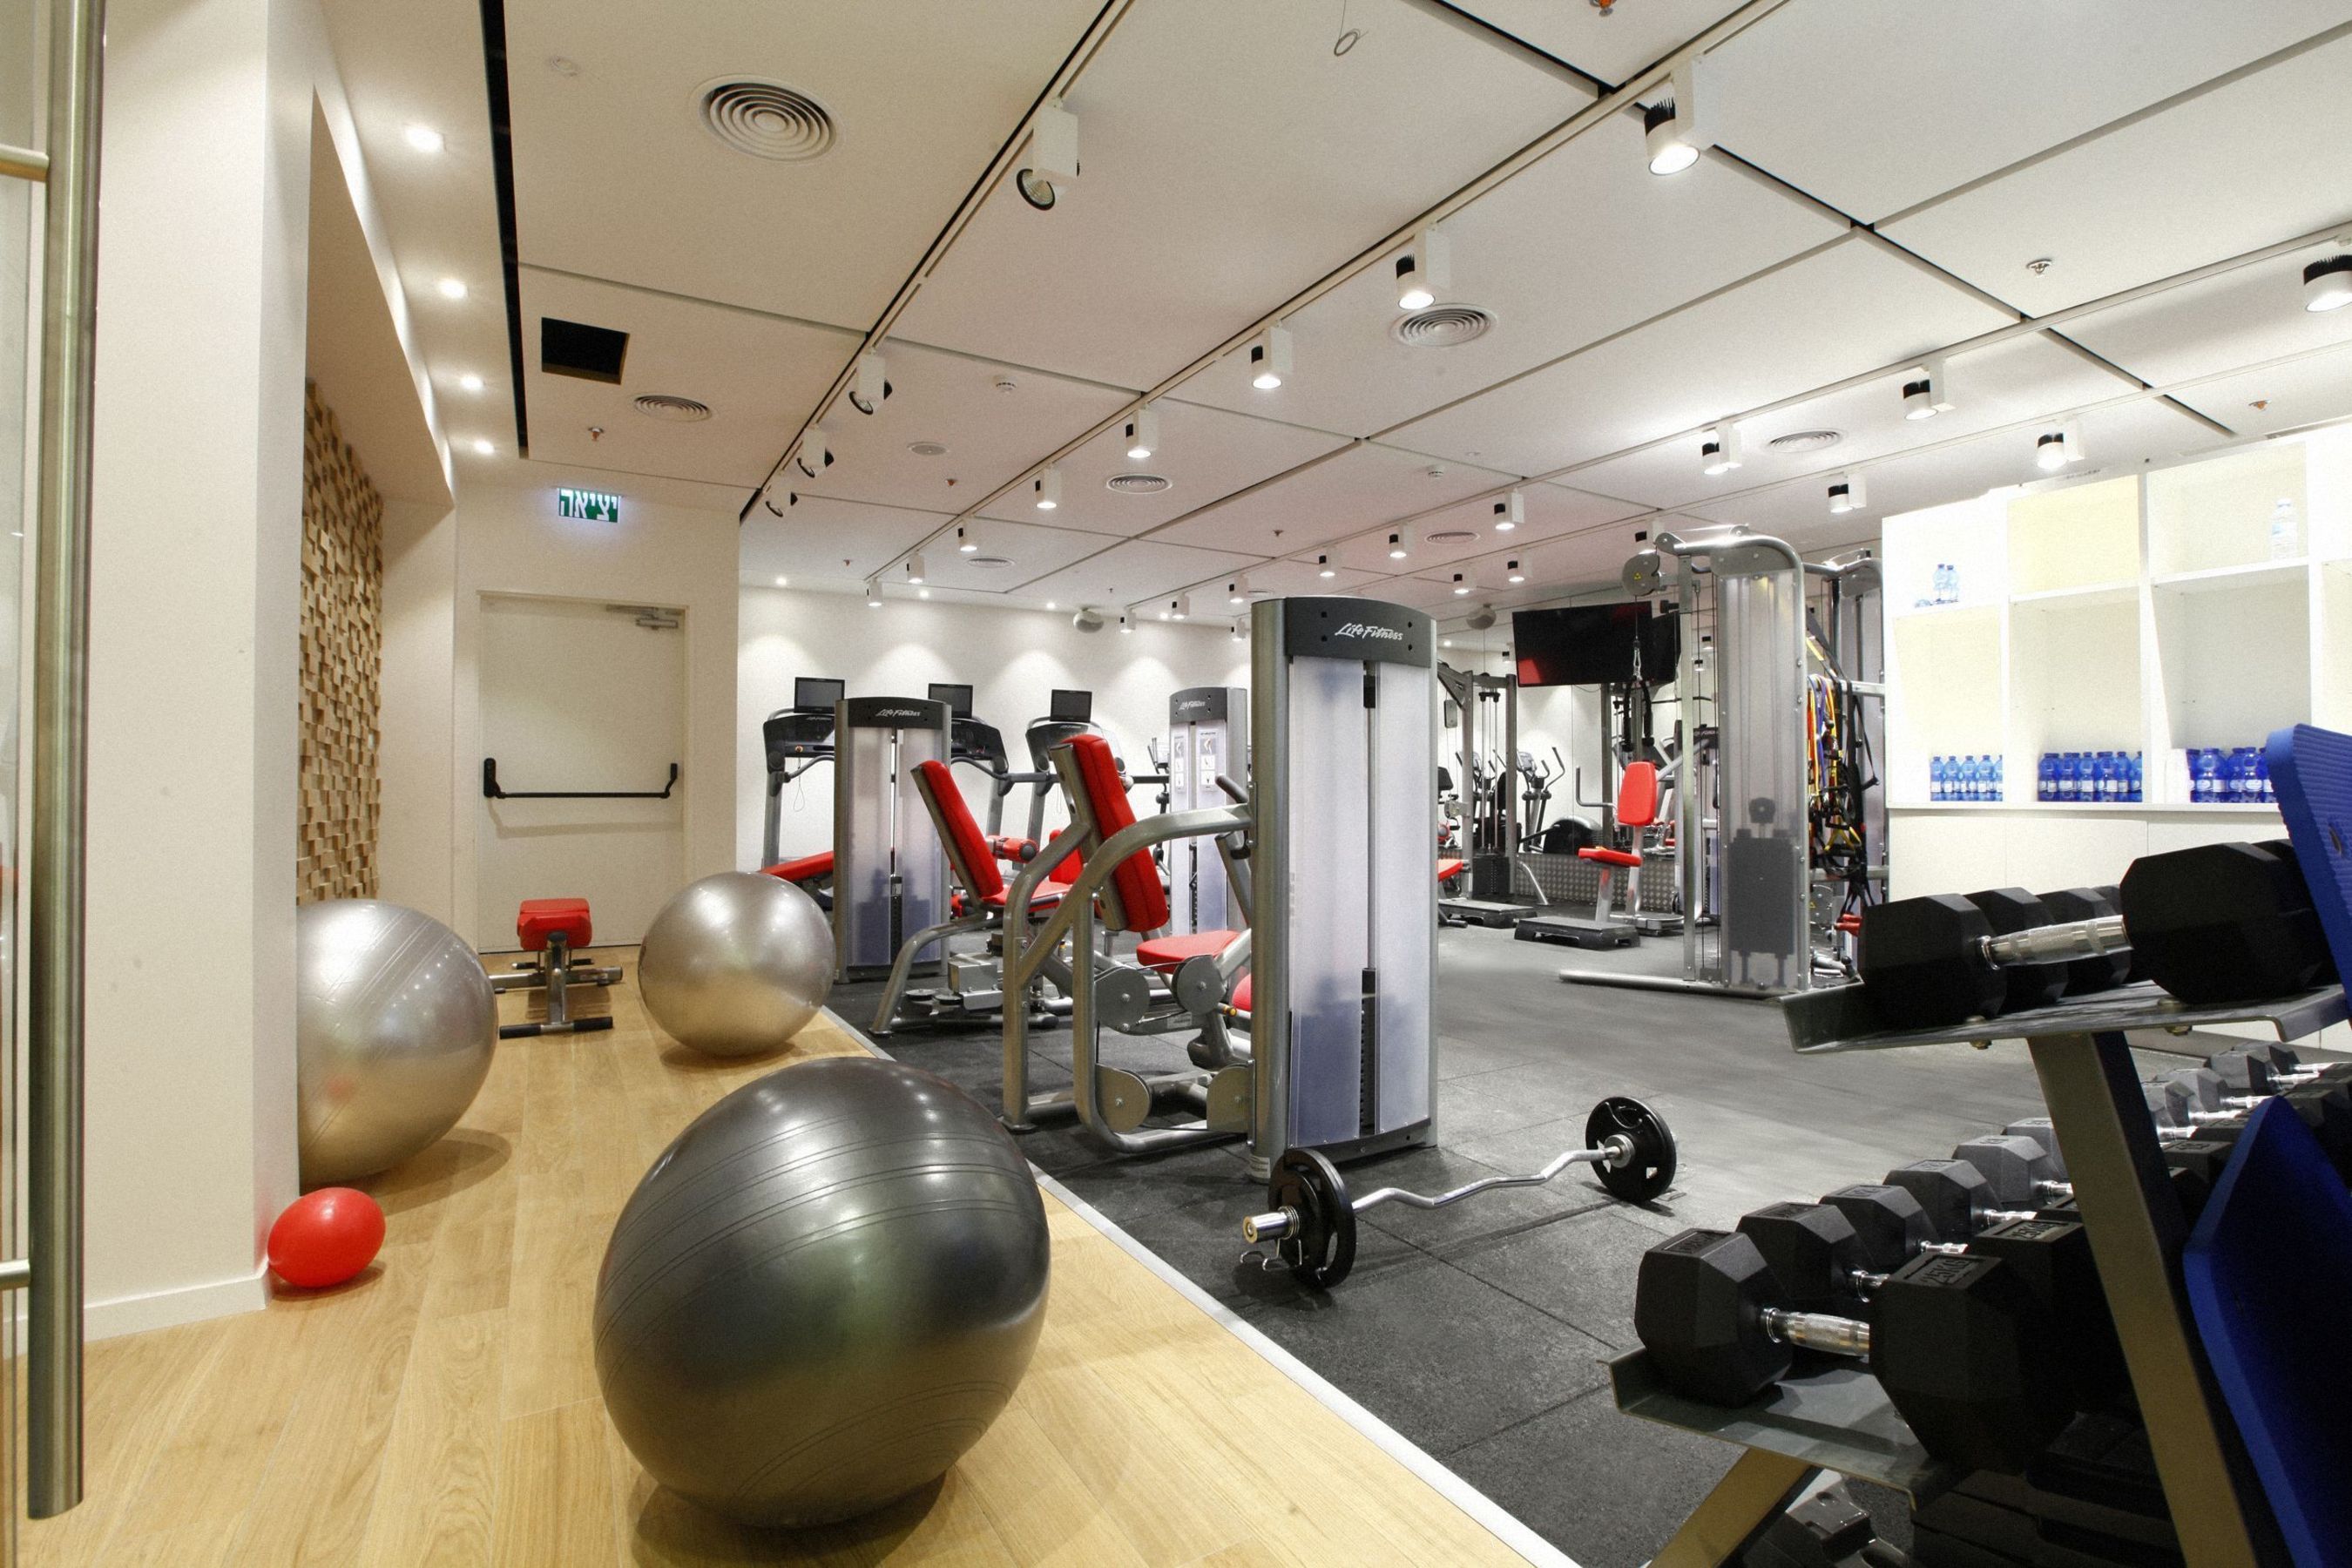 New Free Gym at Artplus Hotel Tel Aviv. Open Daily for all Guests. (PRNewsFoto/Atlas Hotels)